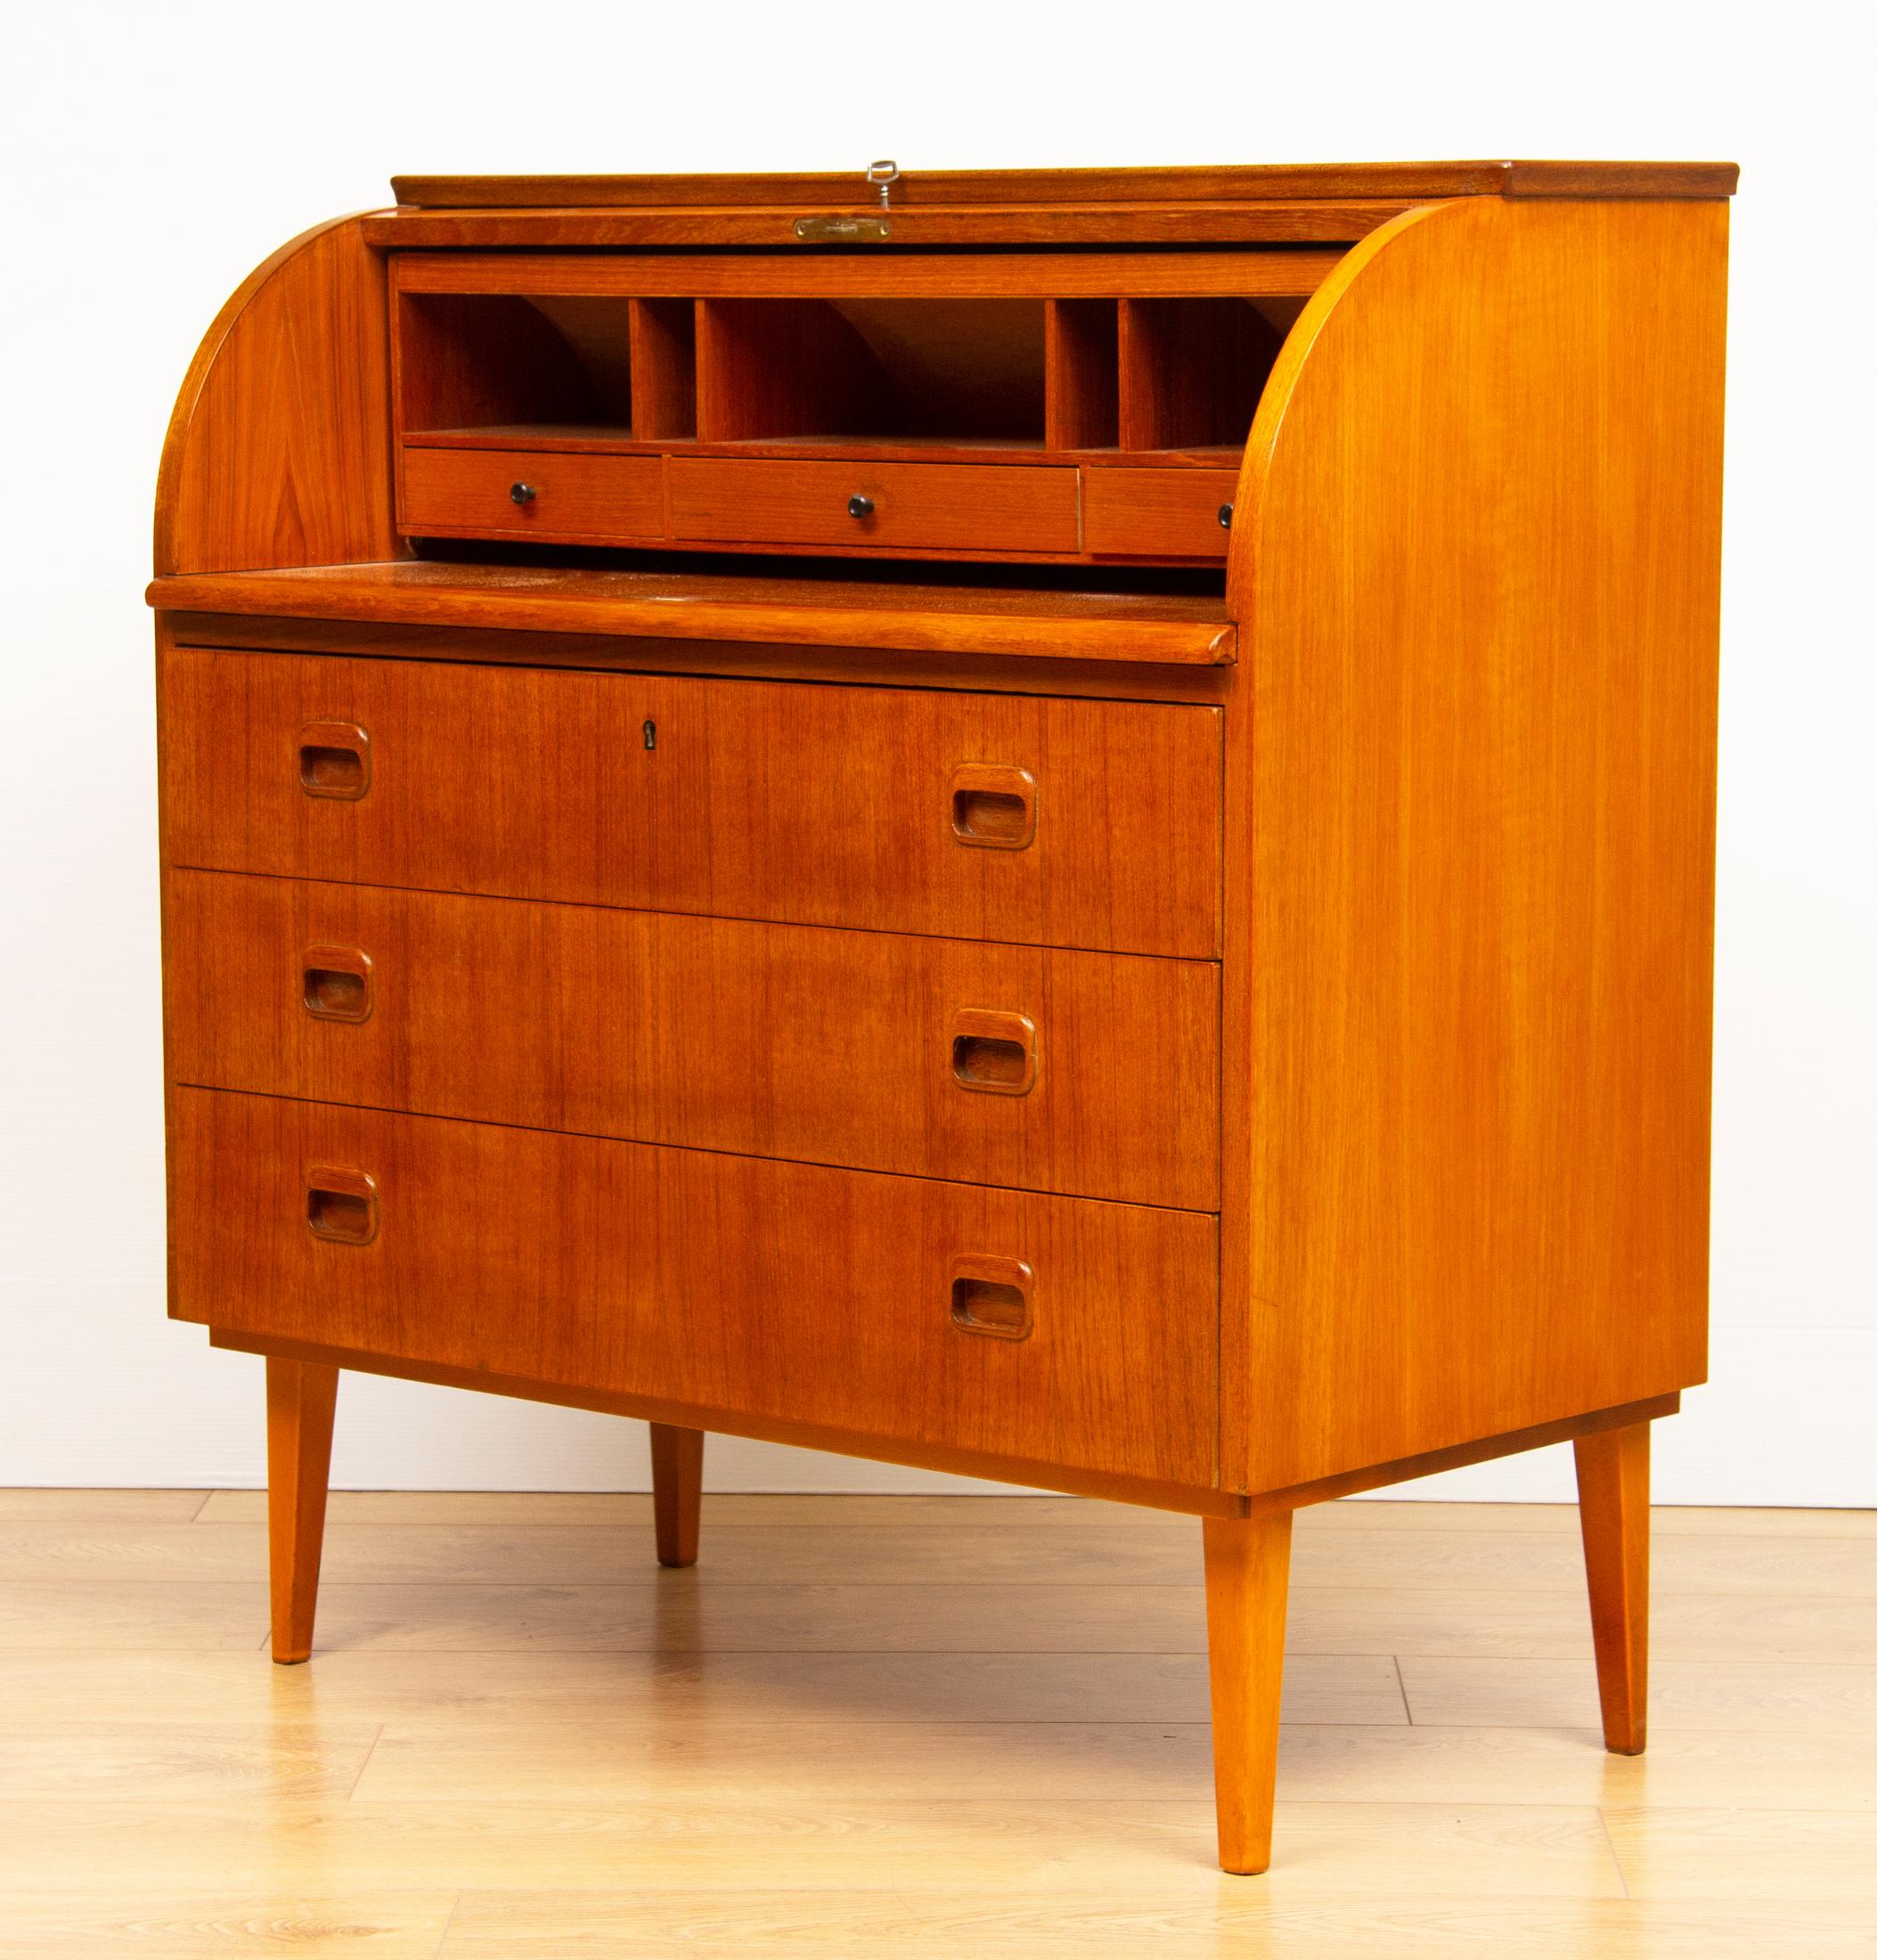 Barrel shaped roll top with quad cut veneer 
Three main section drawers with finger pull handles
Further internal drawers and pigeon holes
Pull out writing surface
Tapered legs
Original key.